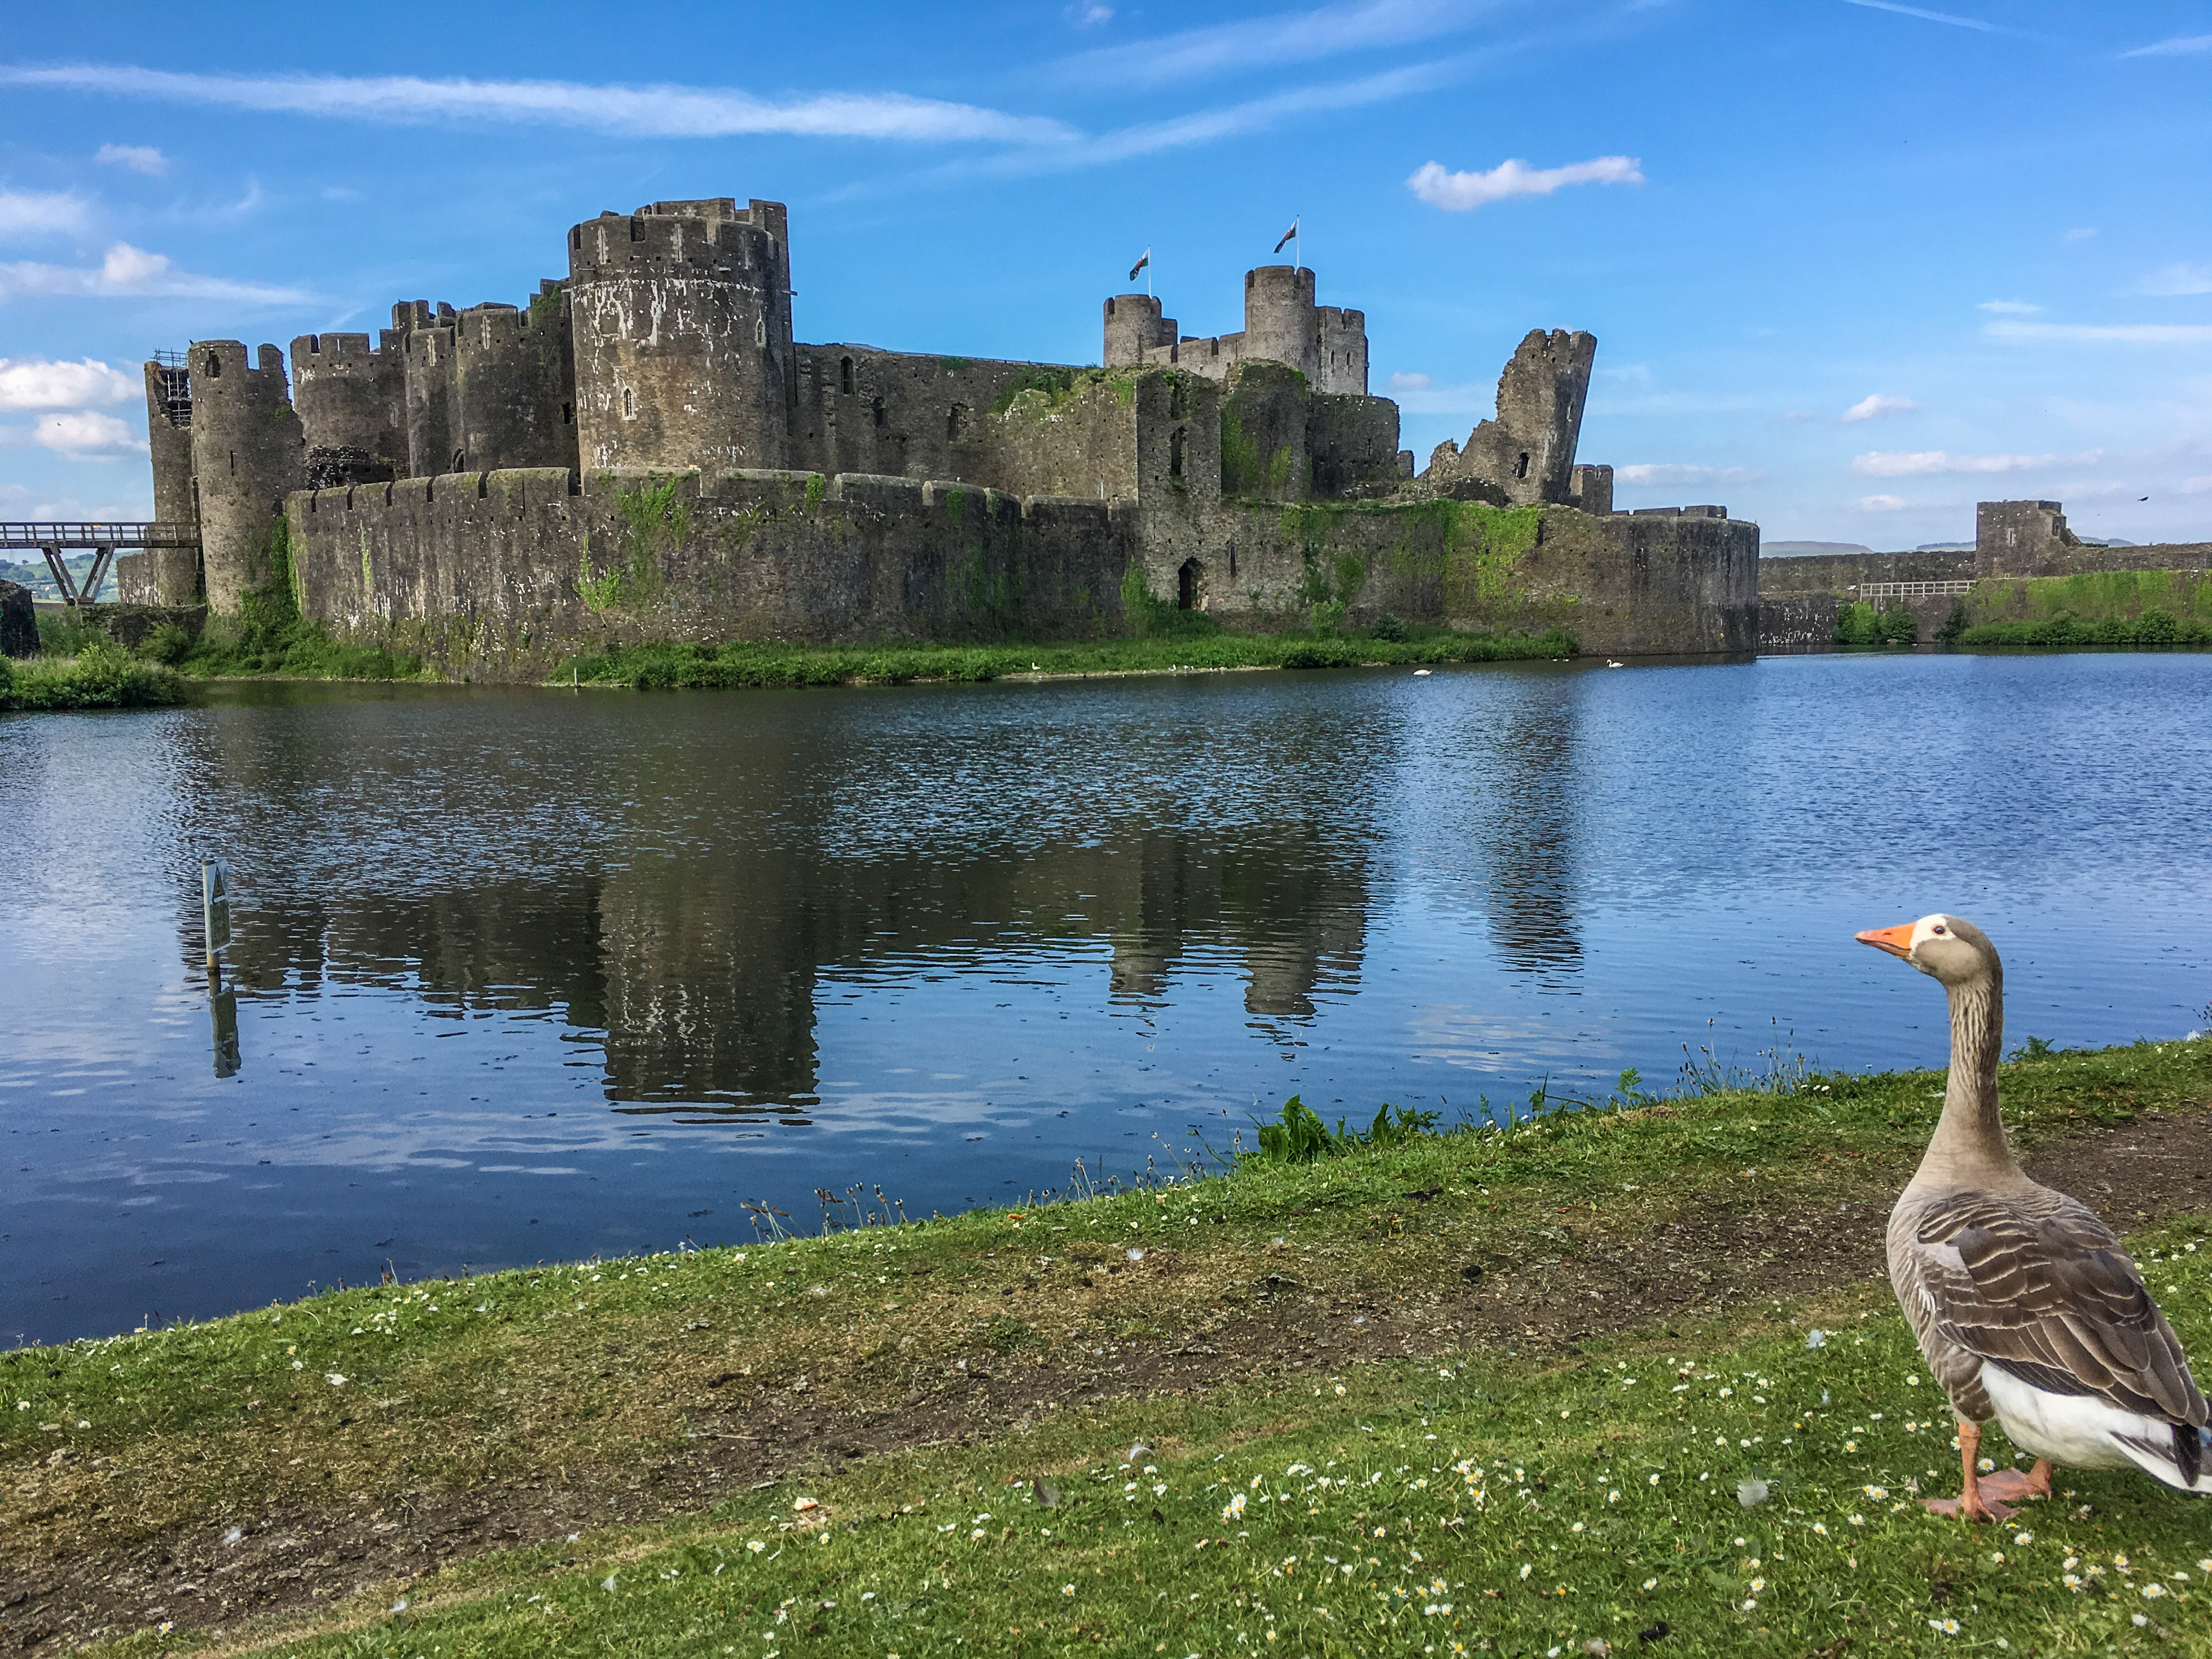 What a view of Caerphilly Castle